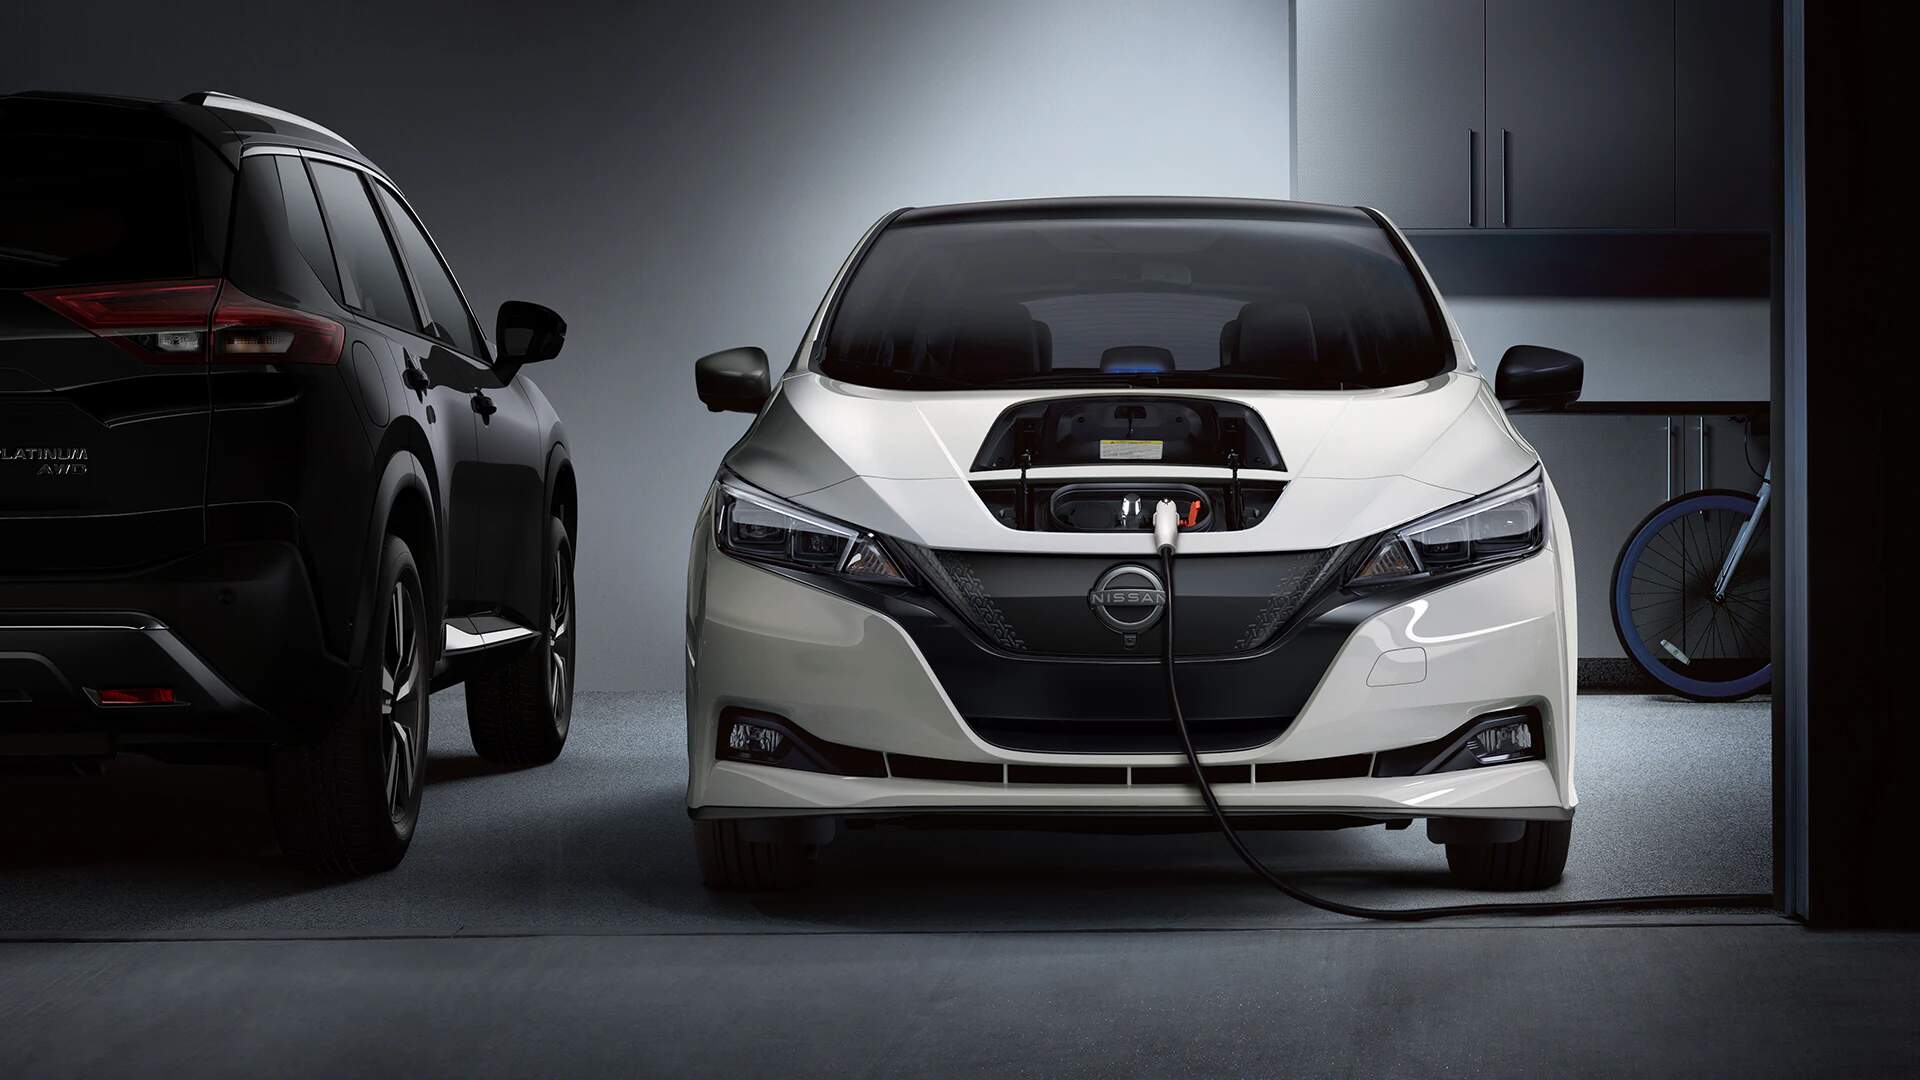 Nissan of Cool Springs is Tennessee's premier Nissan dealership. We have a wide selection of new and used Nissan models for sale. See us and check out the new Nissan Leaf.